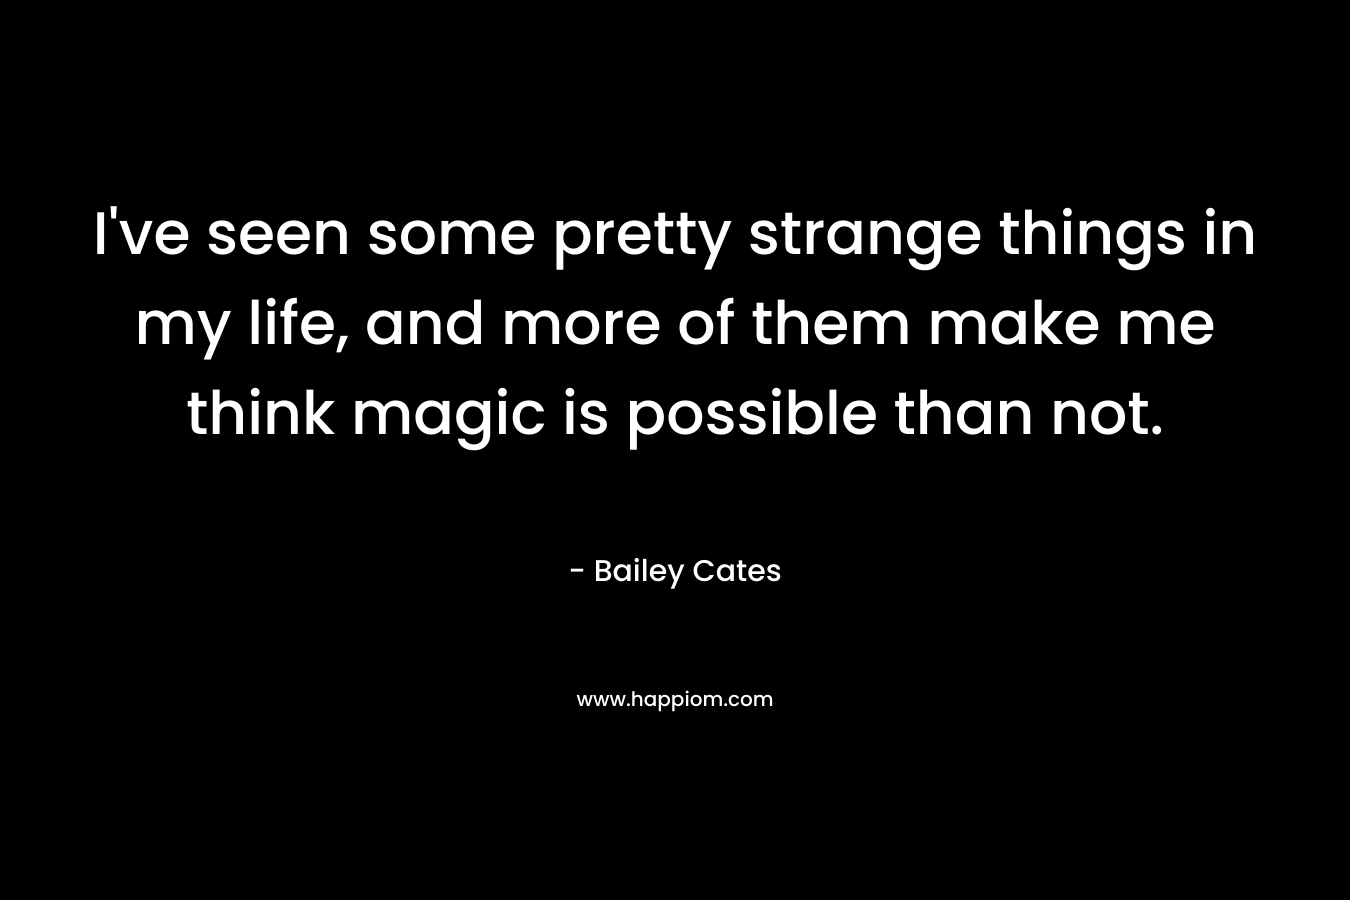 I've seen some pretty strange things in my life, and more of them make me think magic is possible than not.